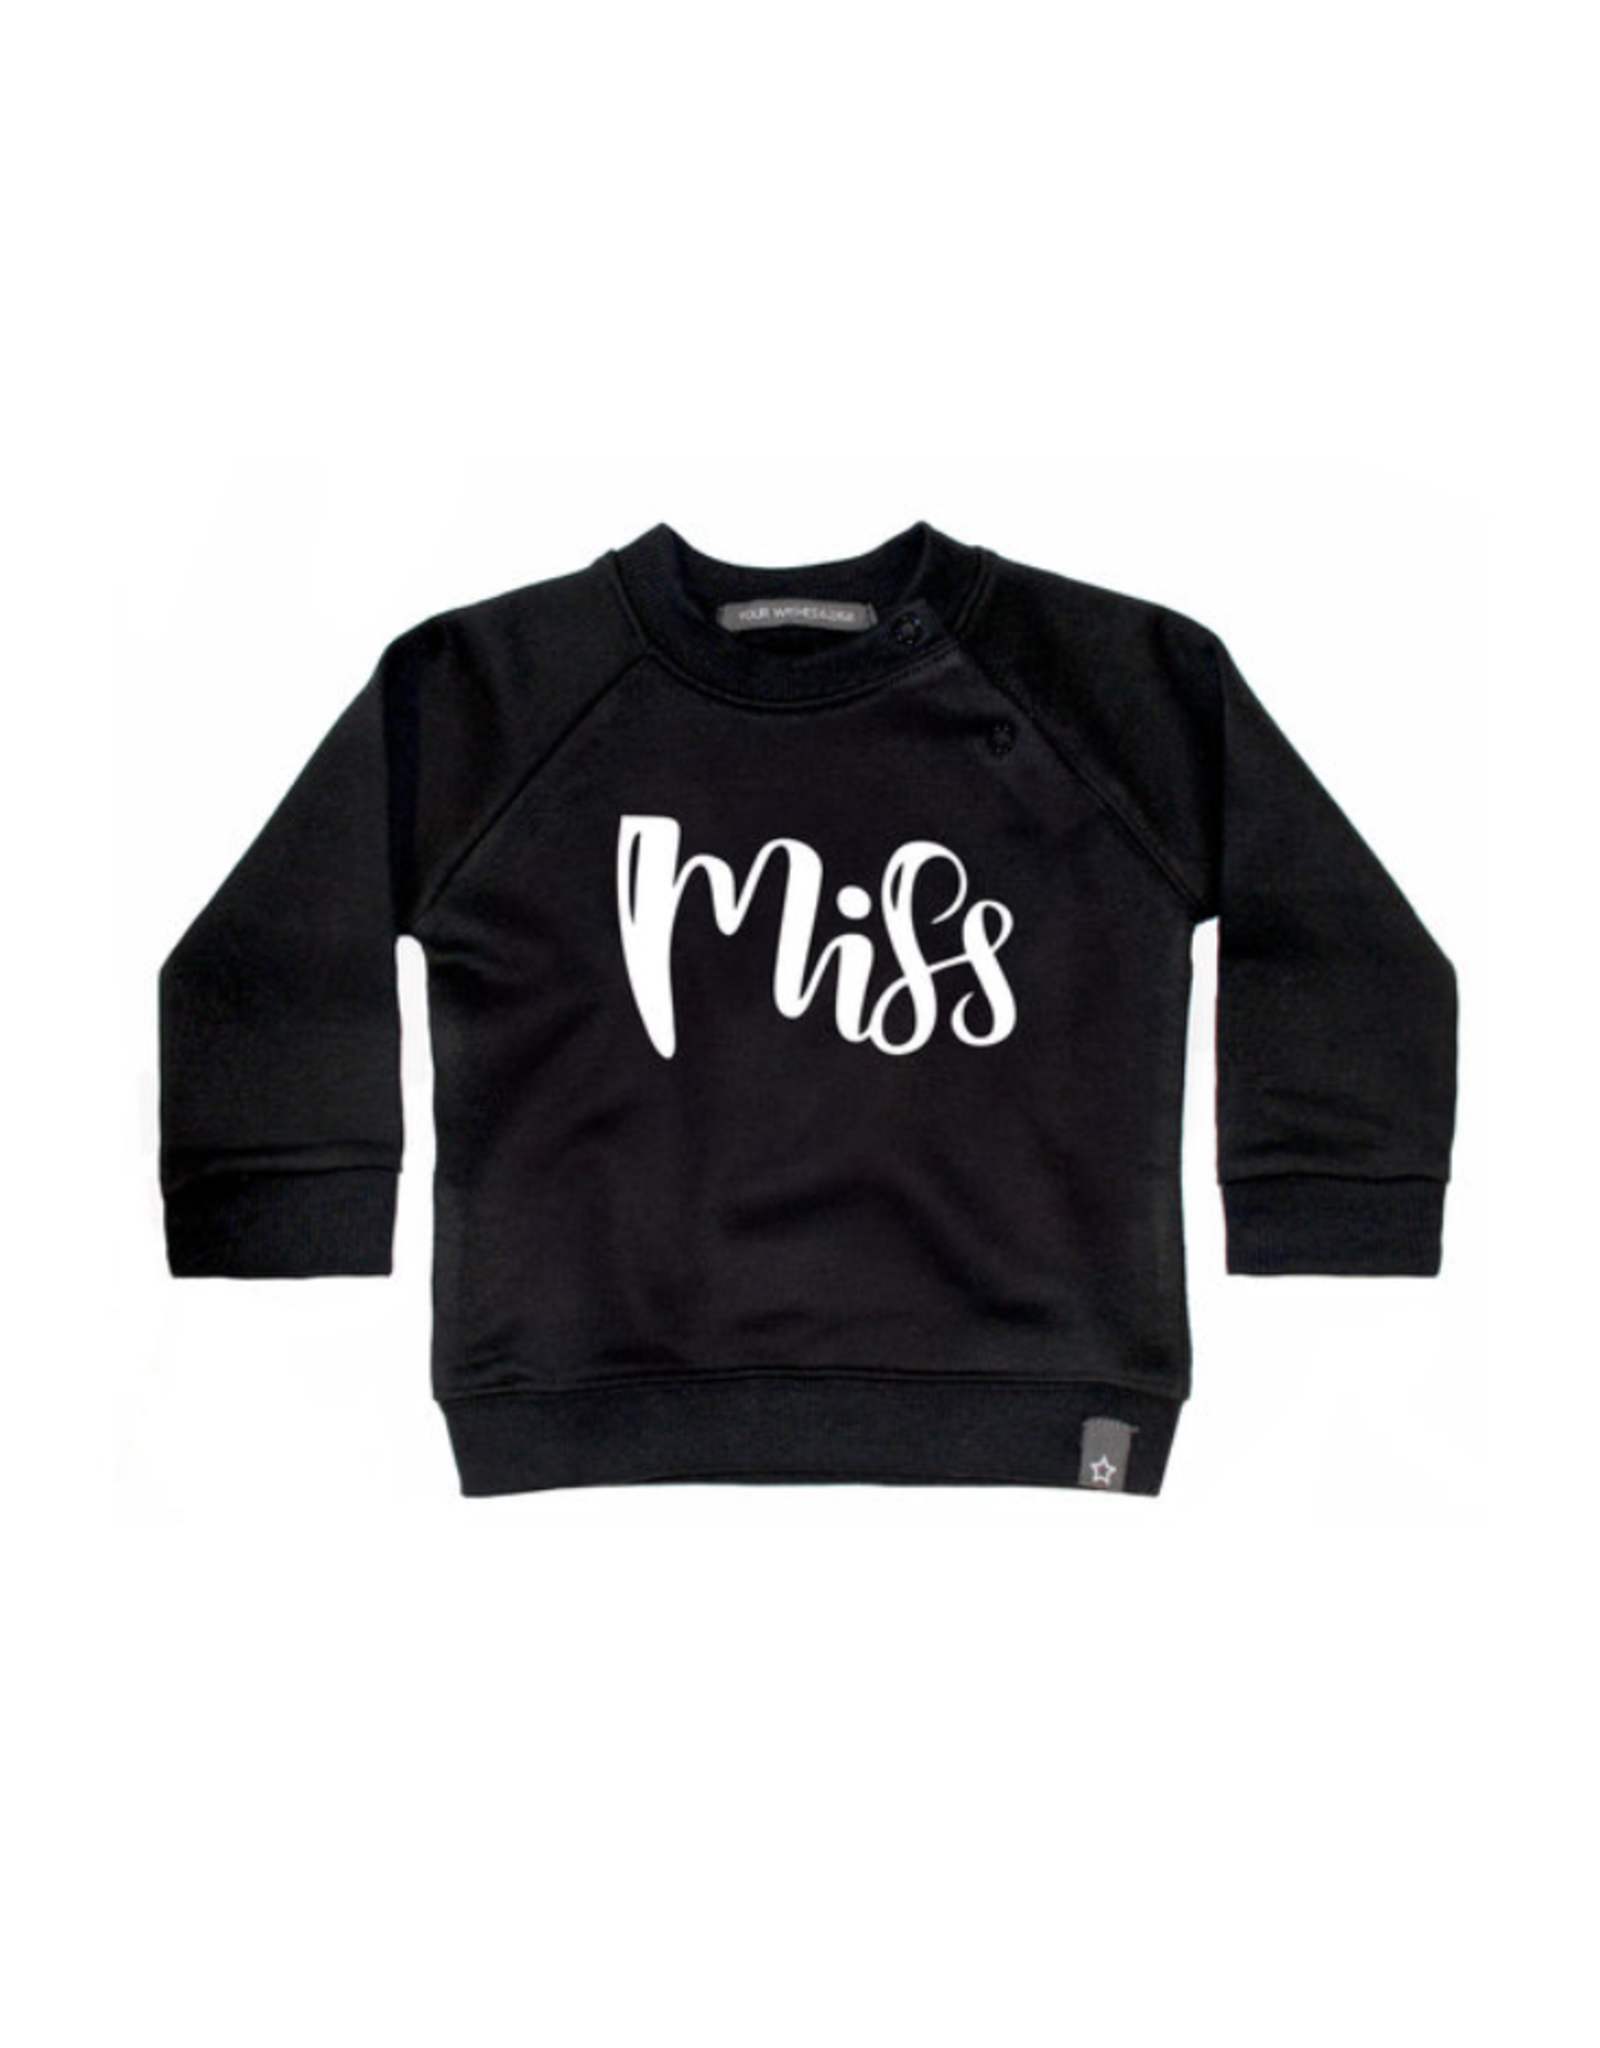 Your Wishes Miss sweater Black NOS